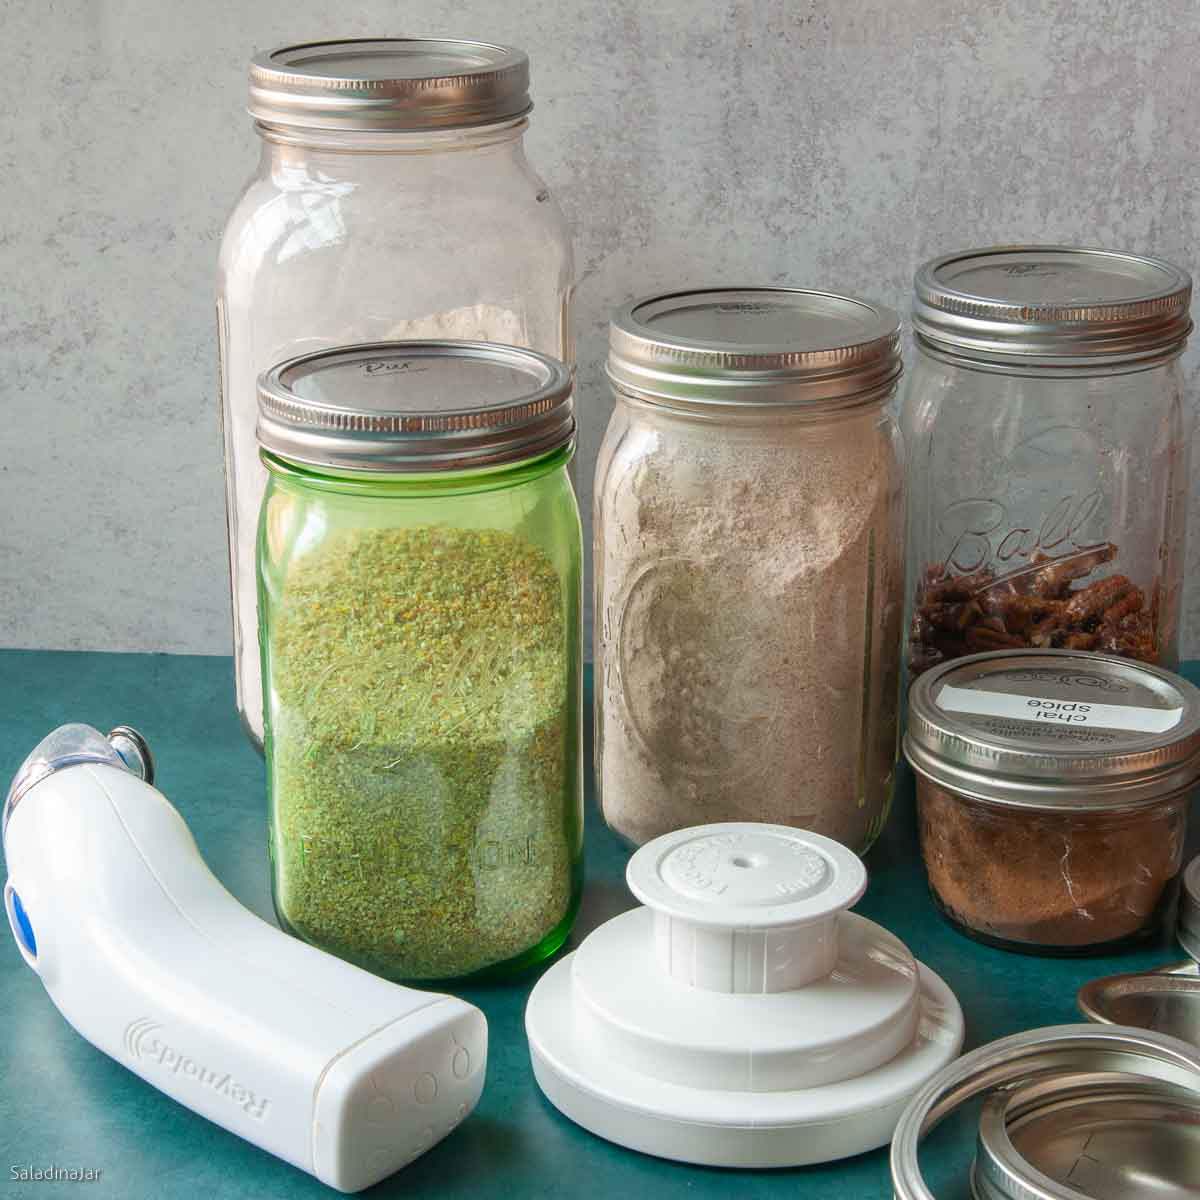 The World's First Mason Jar Personal Portable